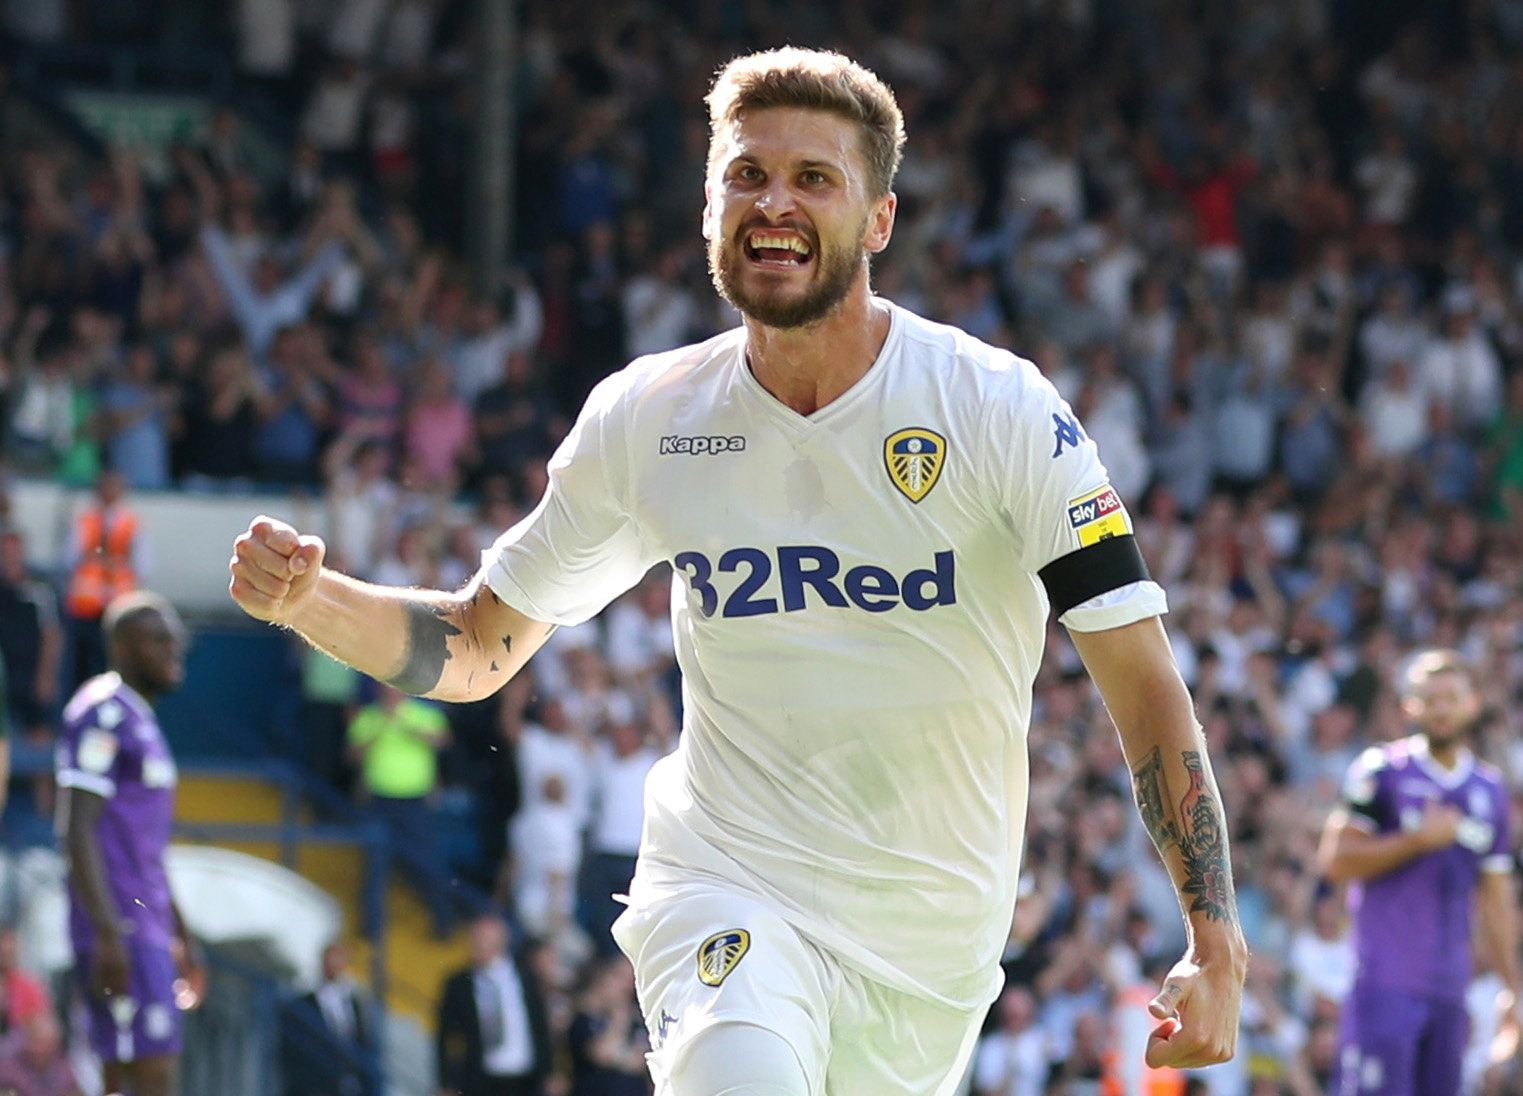 Soccer Football - Championship - Leeds United v Stoke City - Elland Road, Leeds, Britain - August 5, 2018 Leeds United's Mateusz Klich celebrates scoring their first goal Action Images/John Clifton EDITORIAL USE ONLY. No use with unauthorized audio, video, data, fixture lists, club/league logos or 